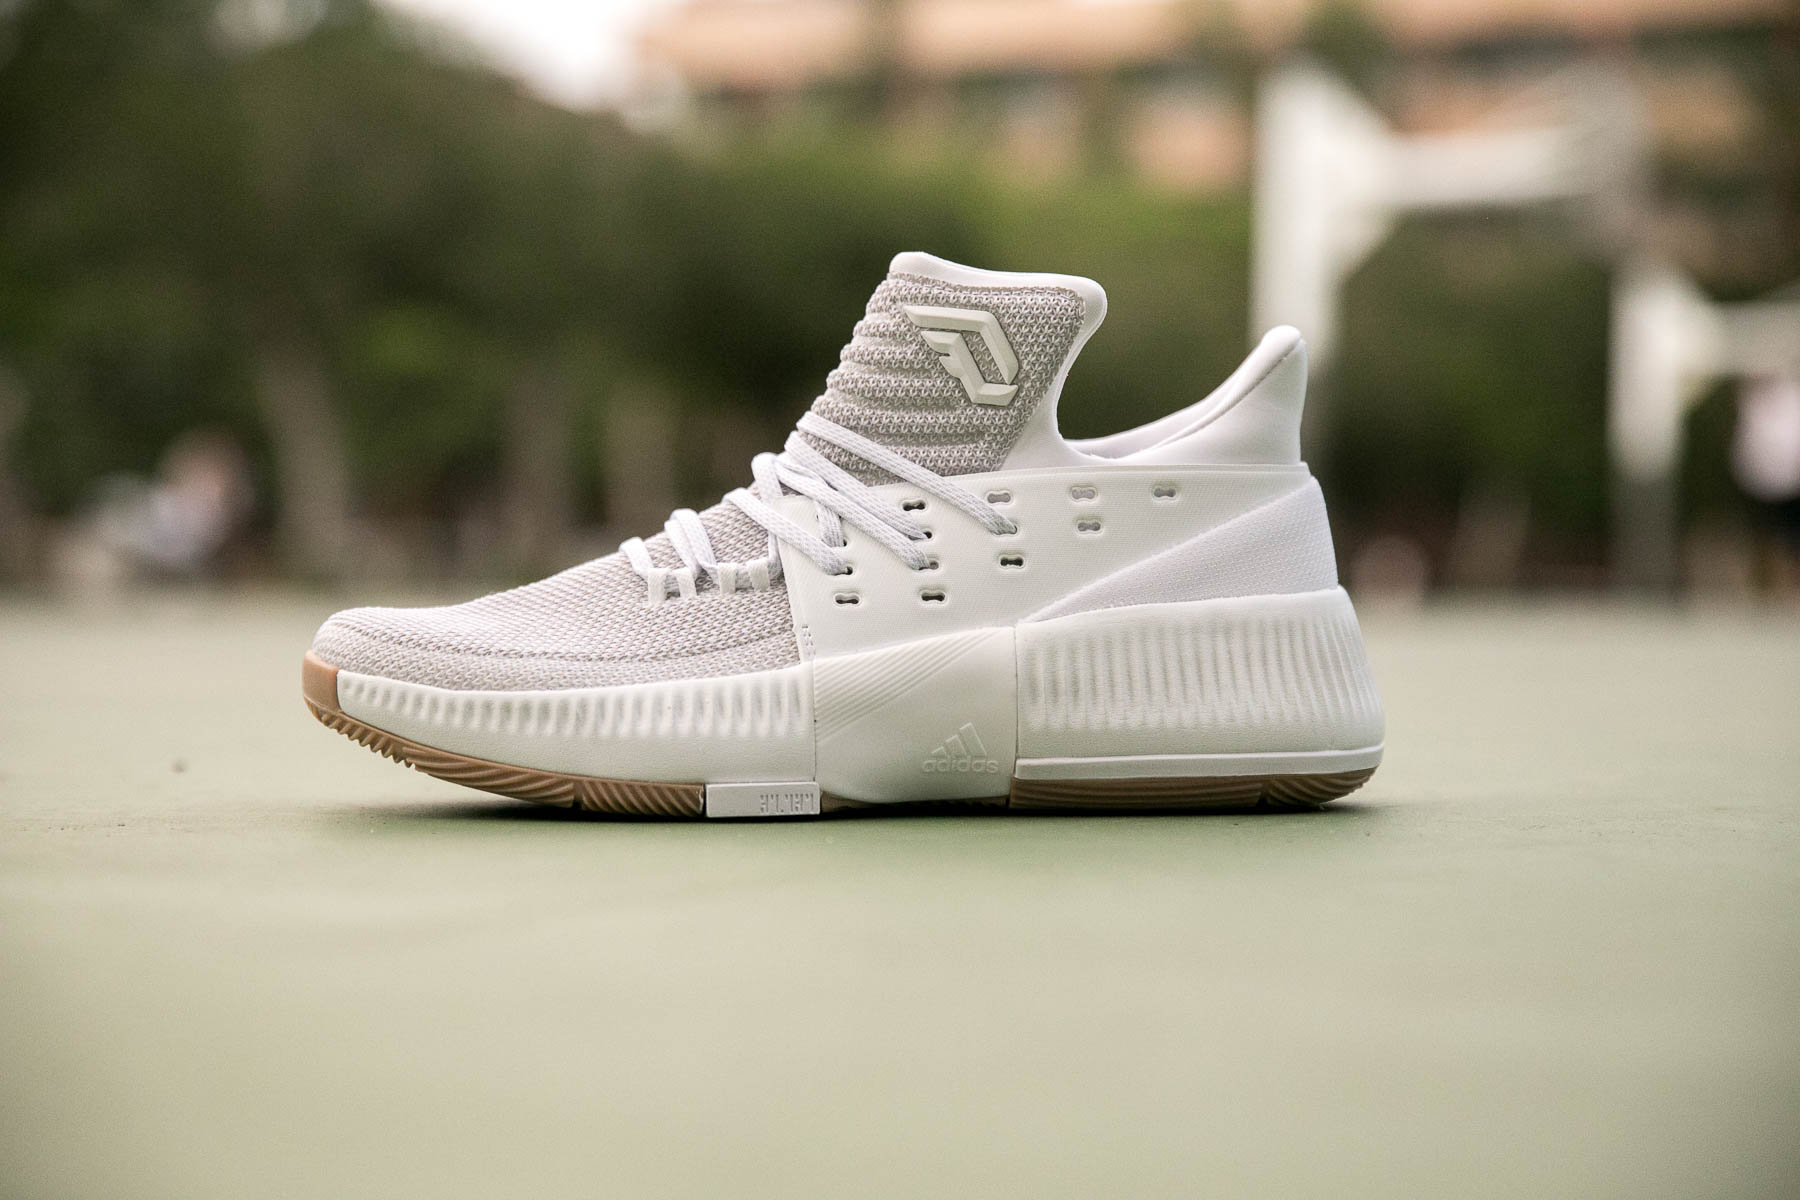 dame 3 review